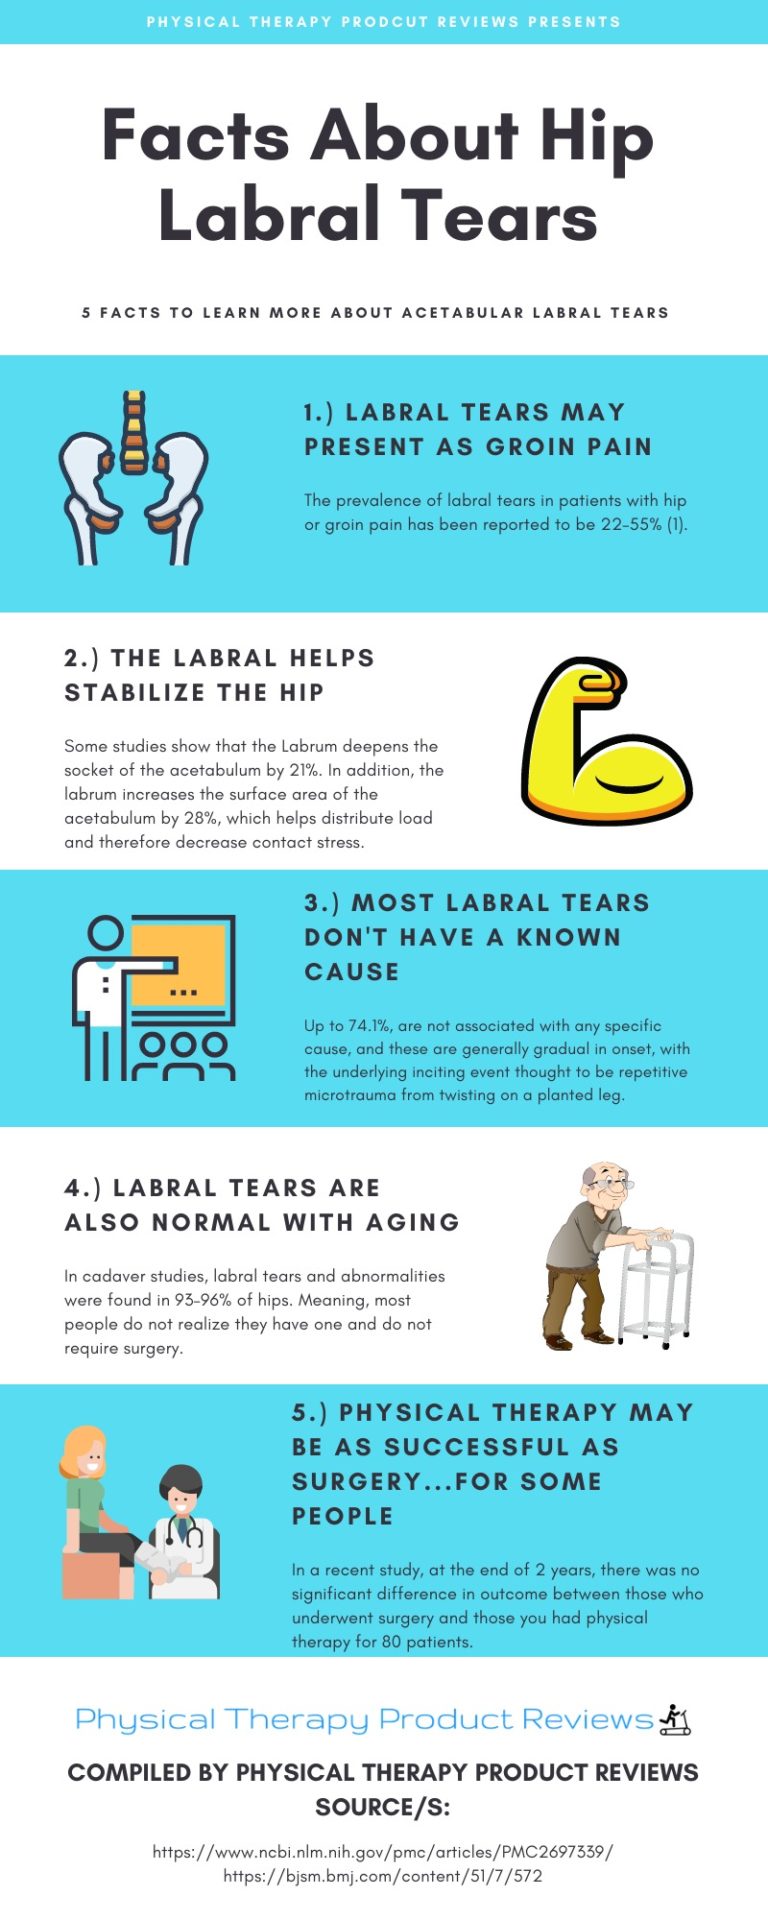 5 Facts About Hip Labral Tears